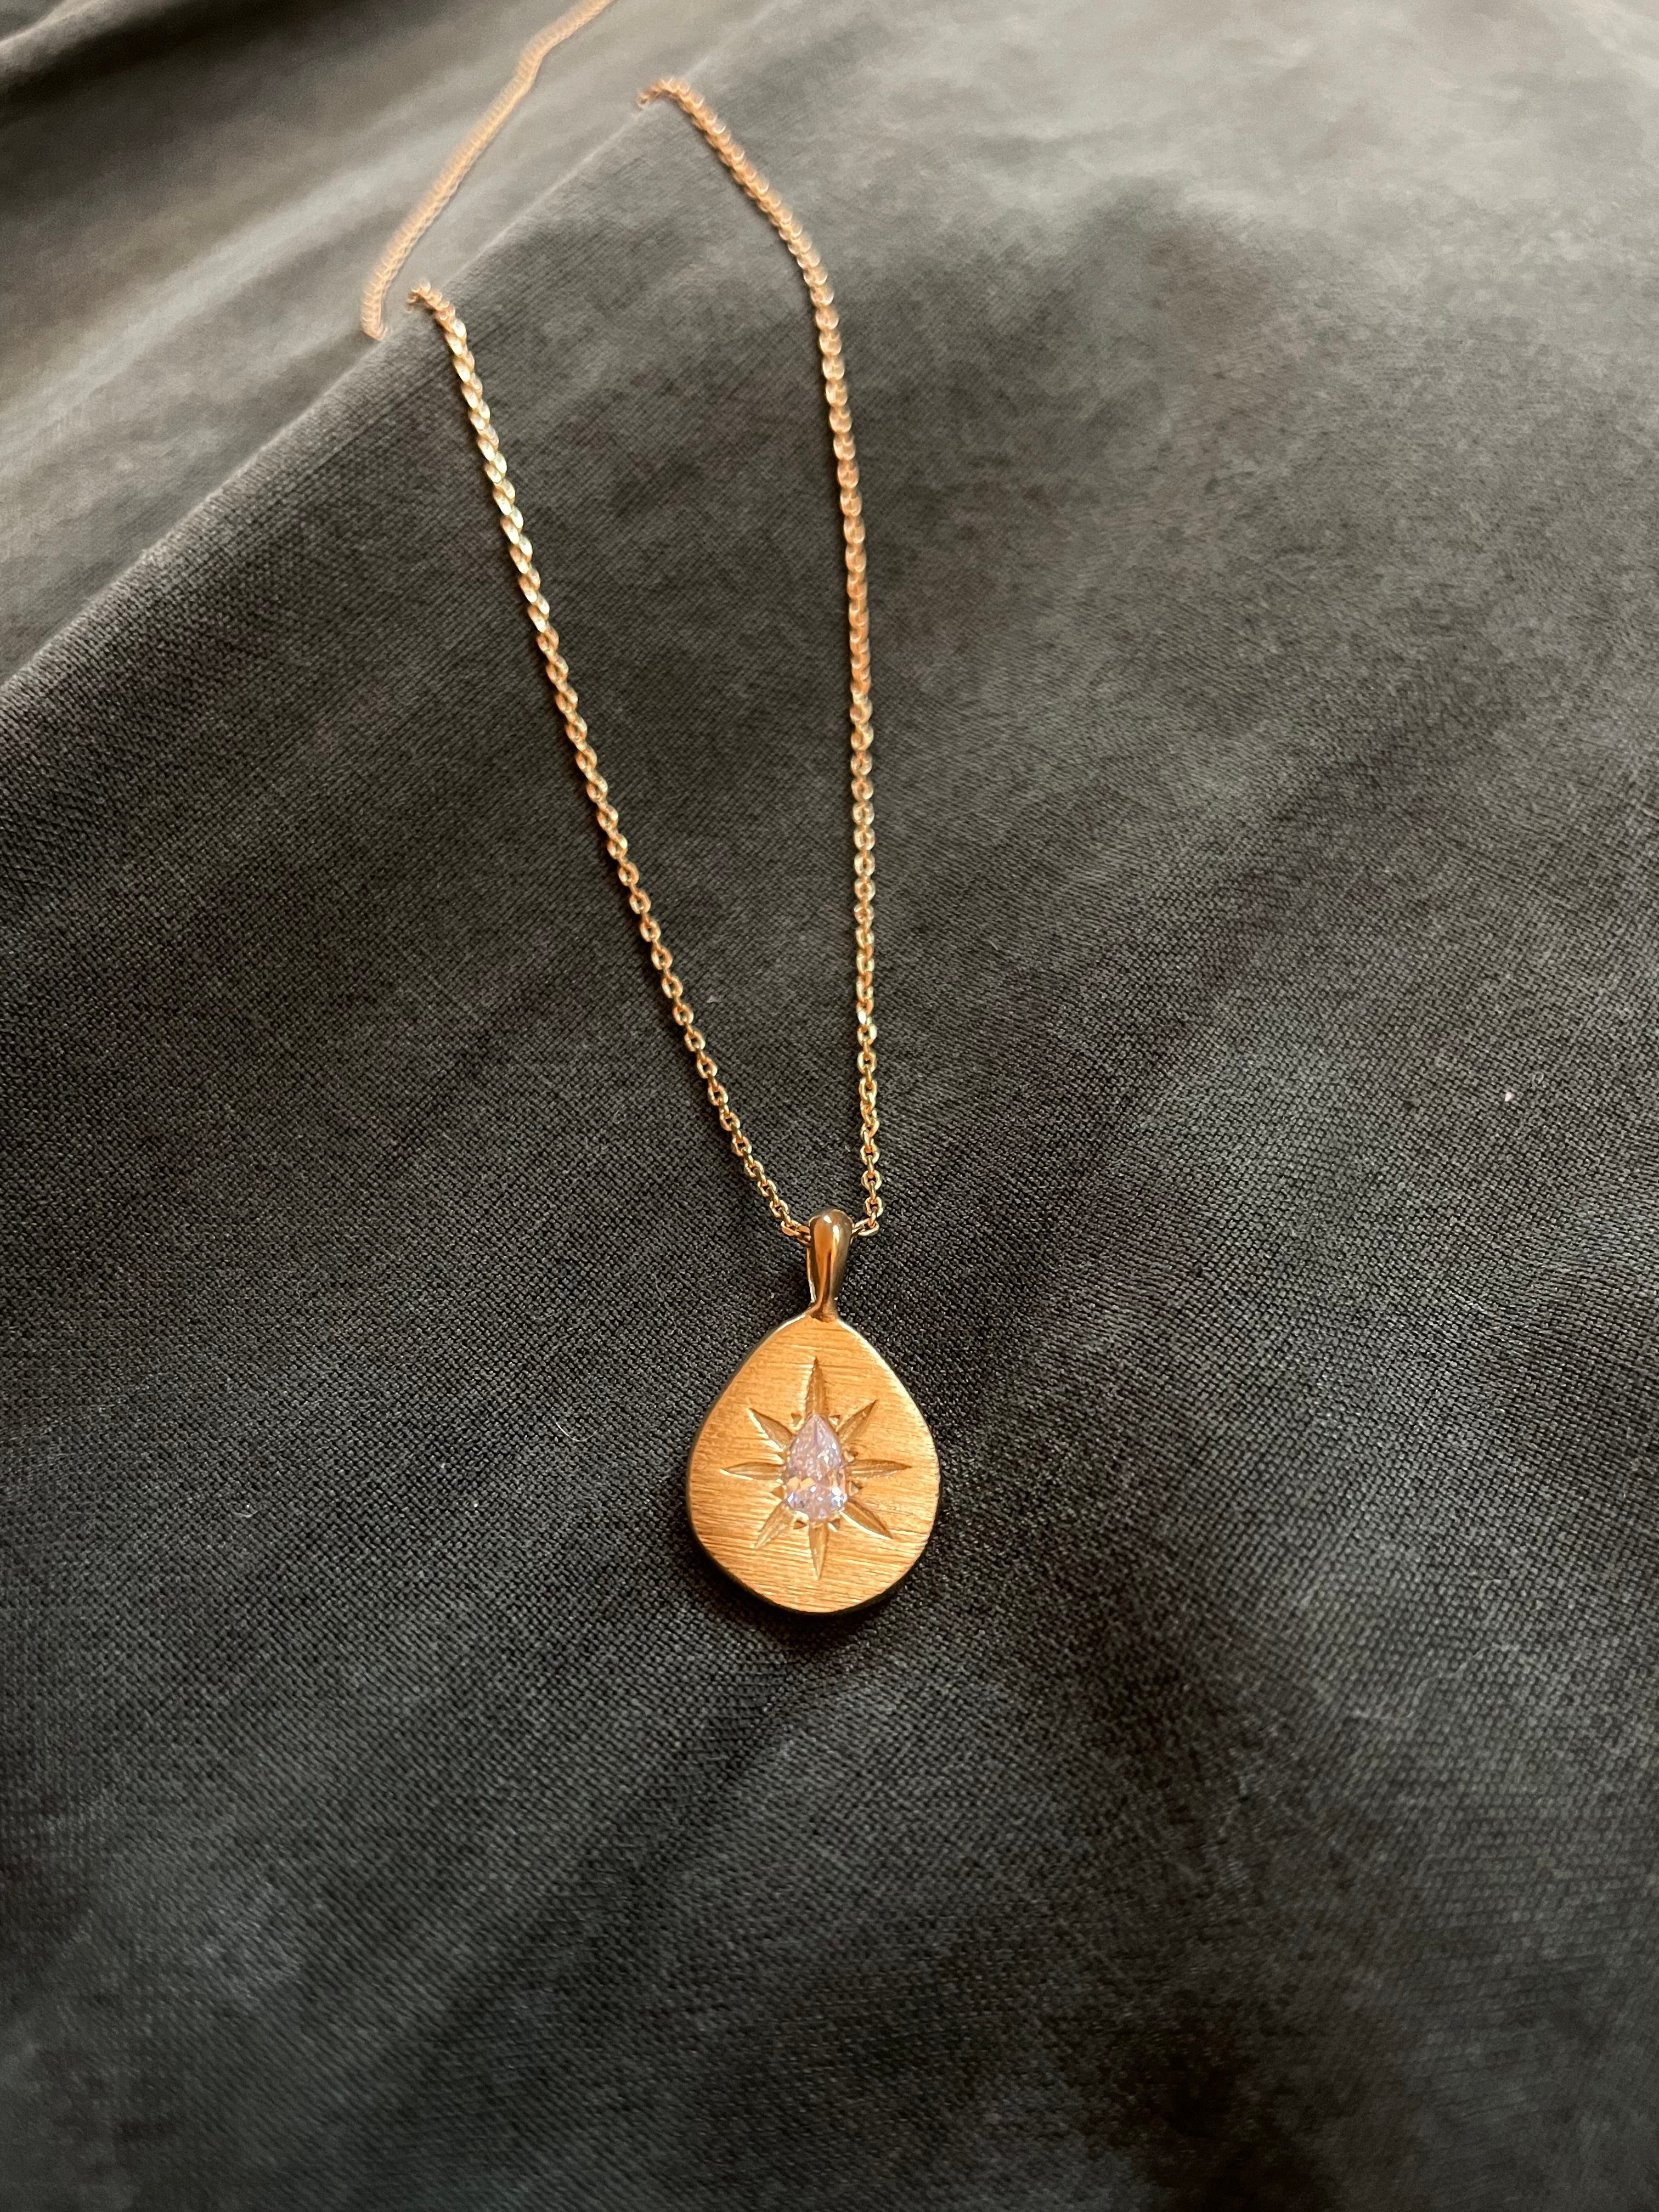 sun medallion tear drop necklace gold plated by hanka in